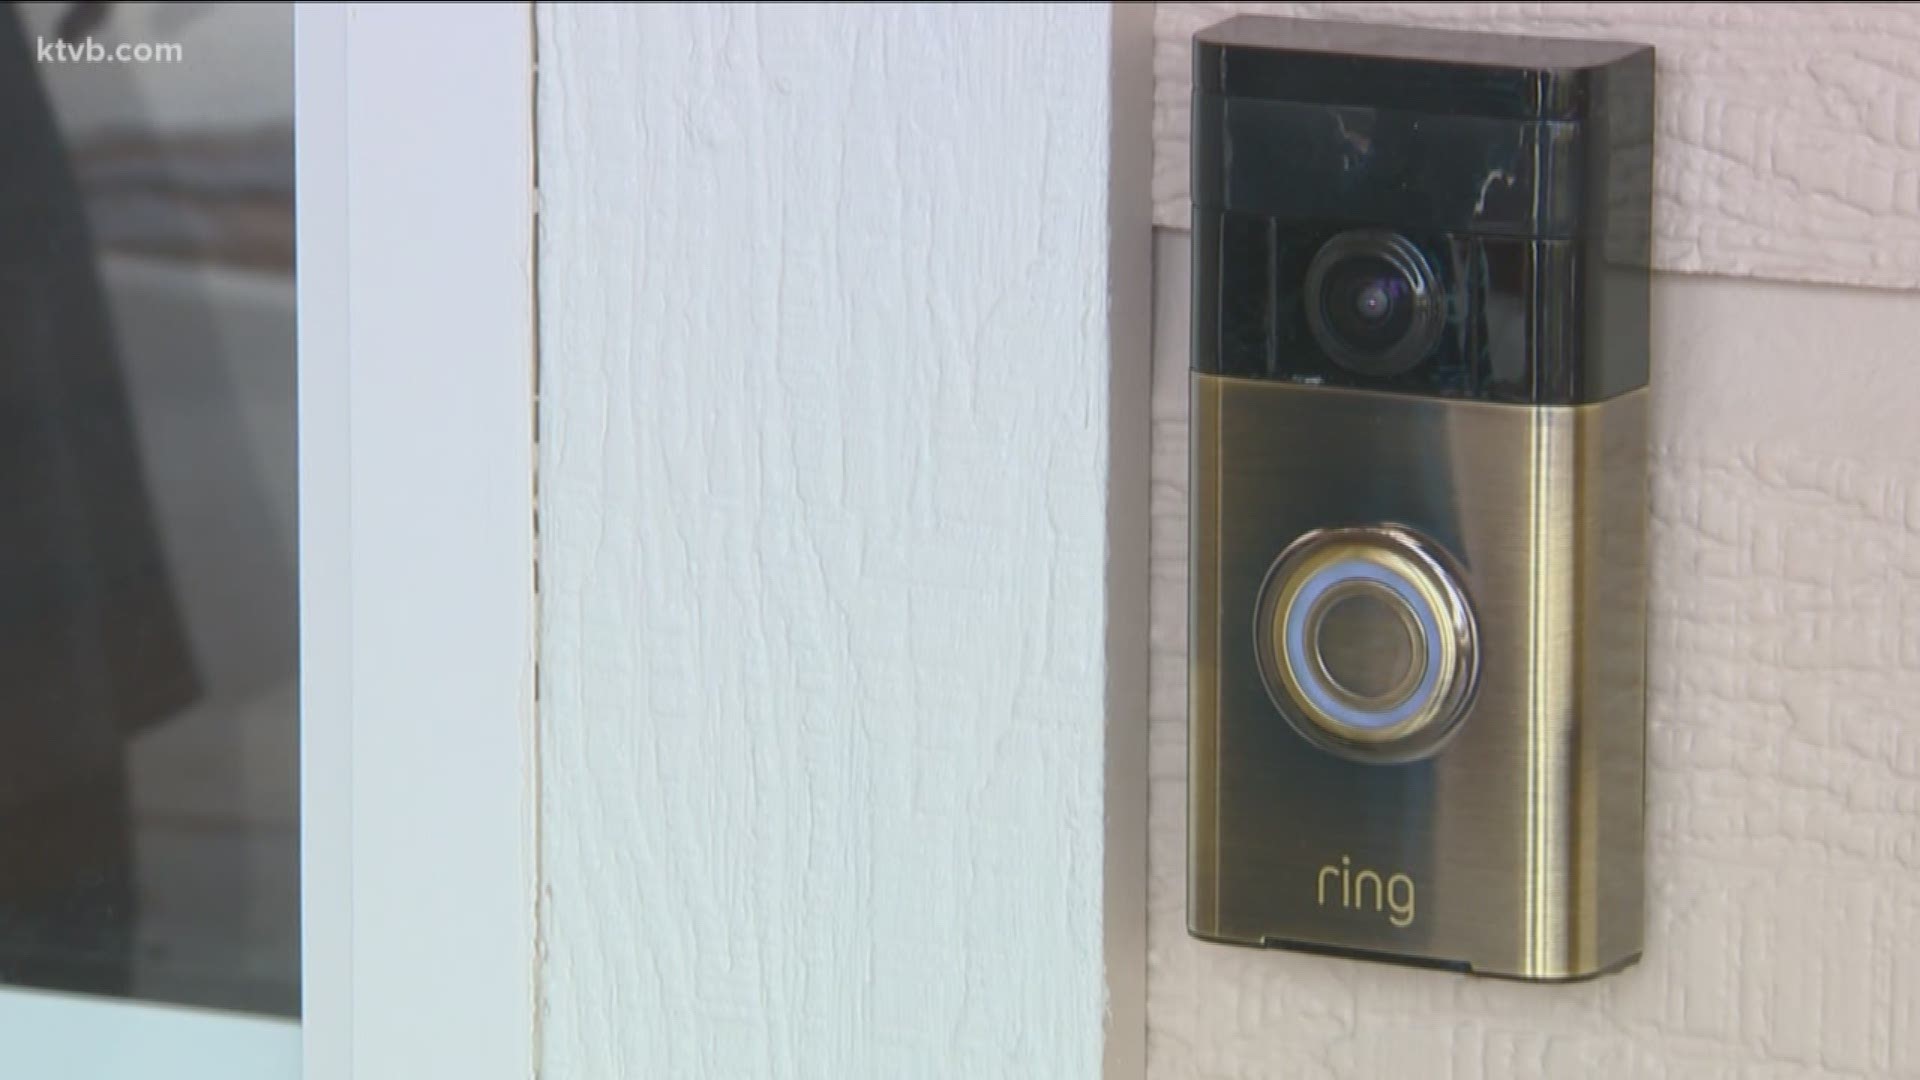 How to get a free Ring doorbell in Akron: Apply now | wkyc.com